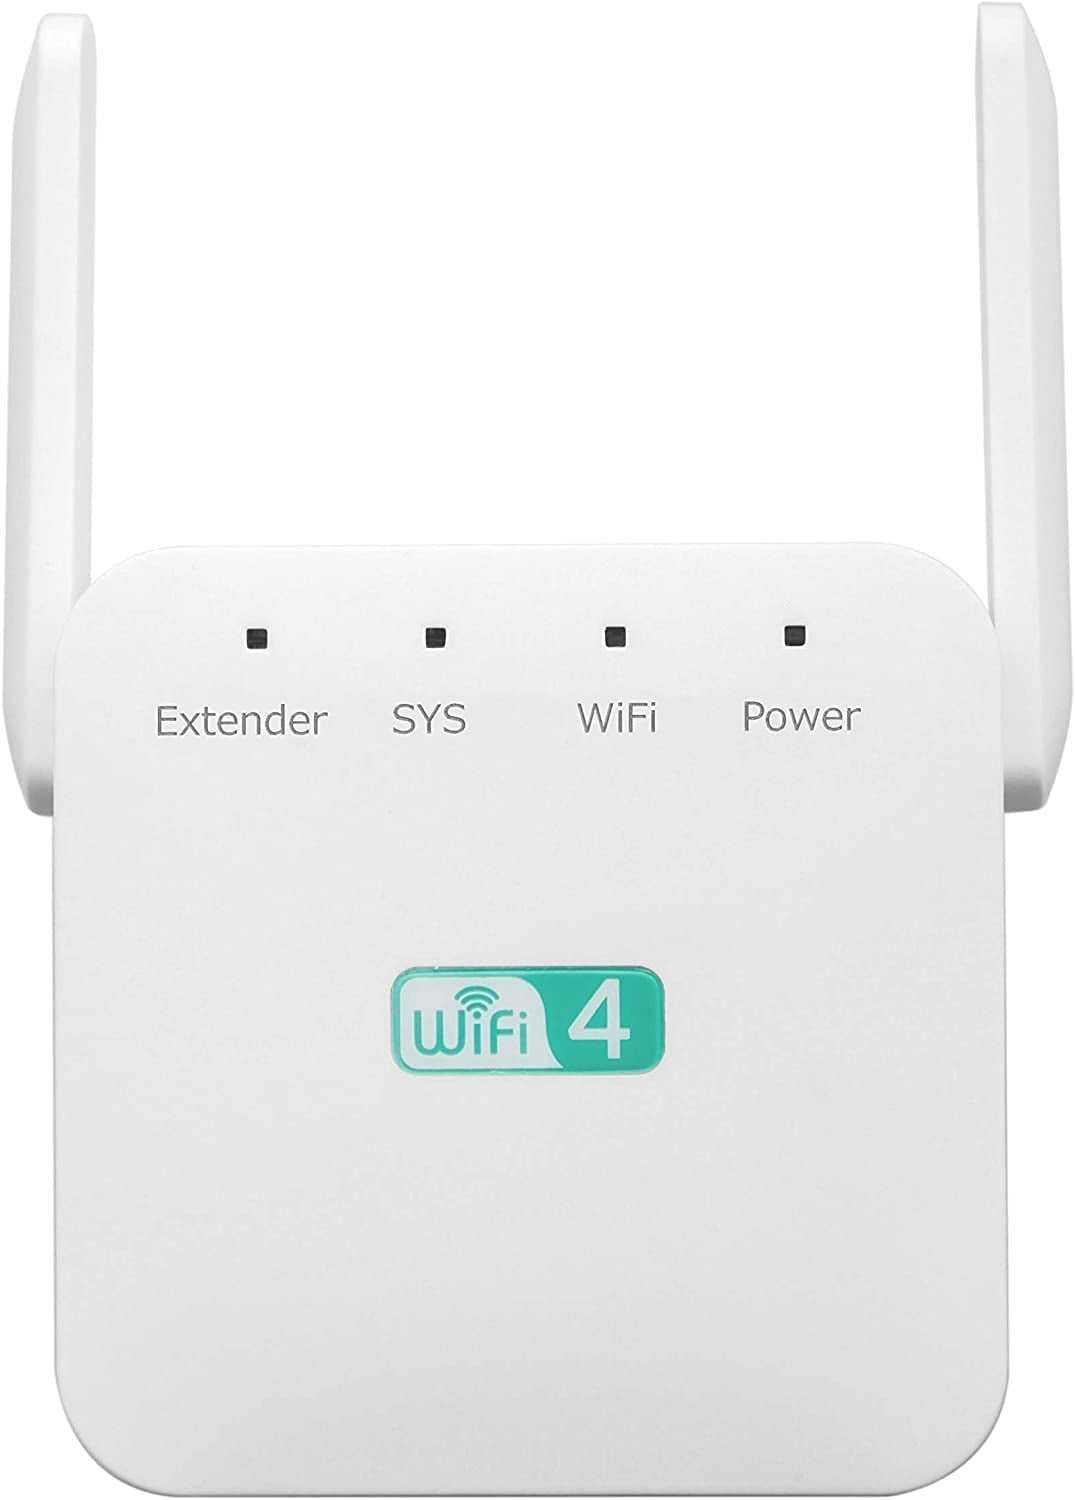 ozon Atticus Invloed Wifi Booster, Extendtecc Wifi Booster, Wifi Range Extender 300Mbps, Wireless  Signal Repeater Booster 2.4 And 5Ghz Dual Band 4 Antennas 360° Full  Coverage - Walmart.com